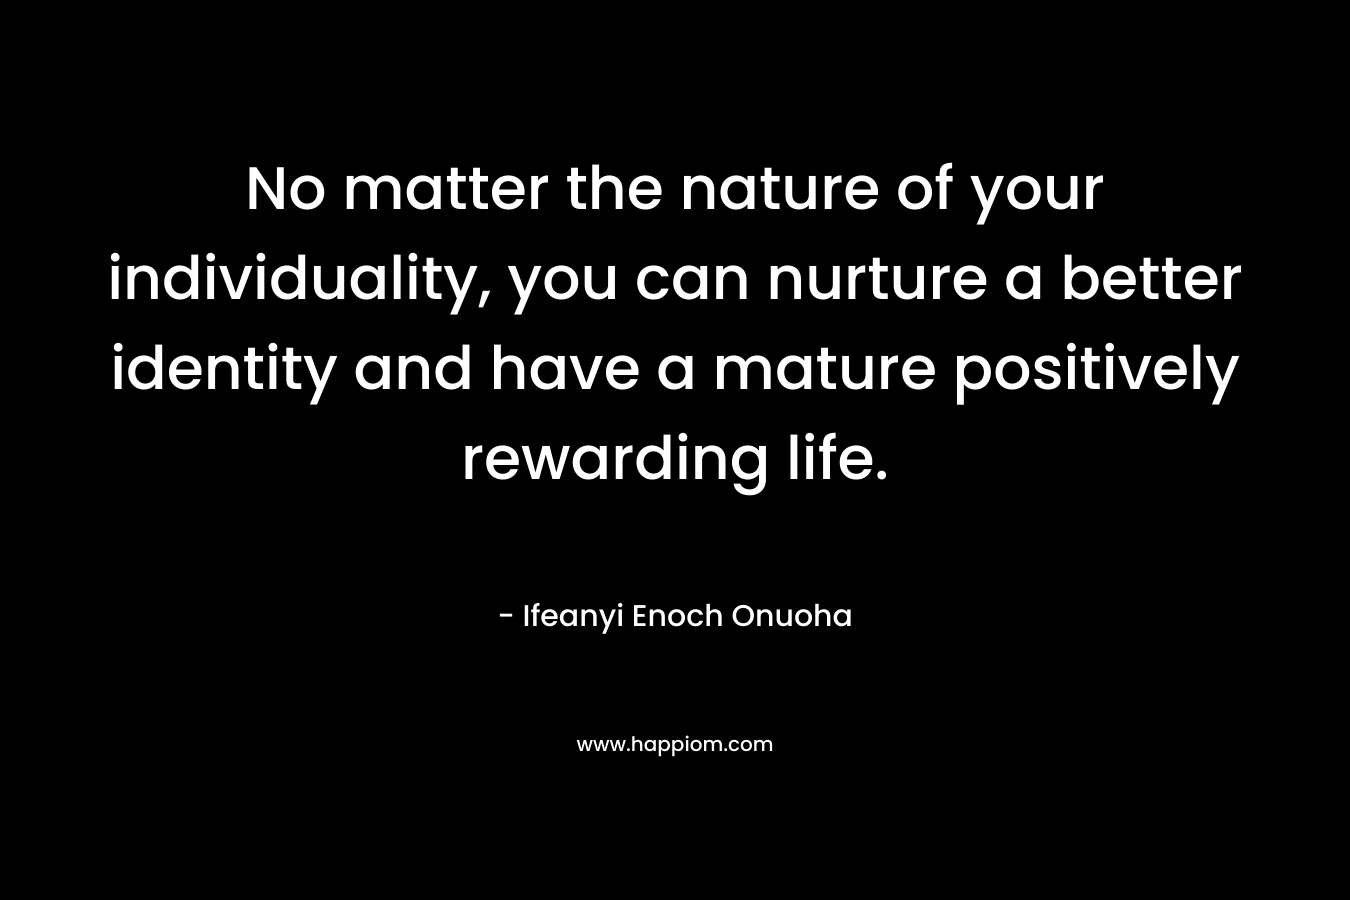 No matter the nature of your individuality, you can nurture a better identity and have a mature positively rewarding life.